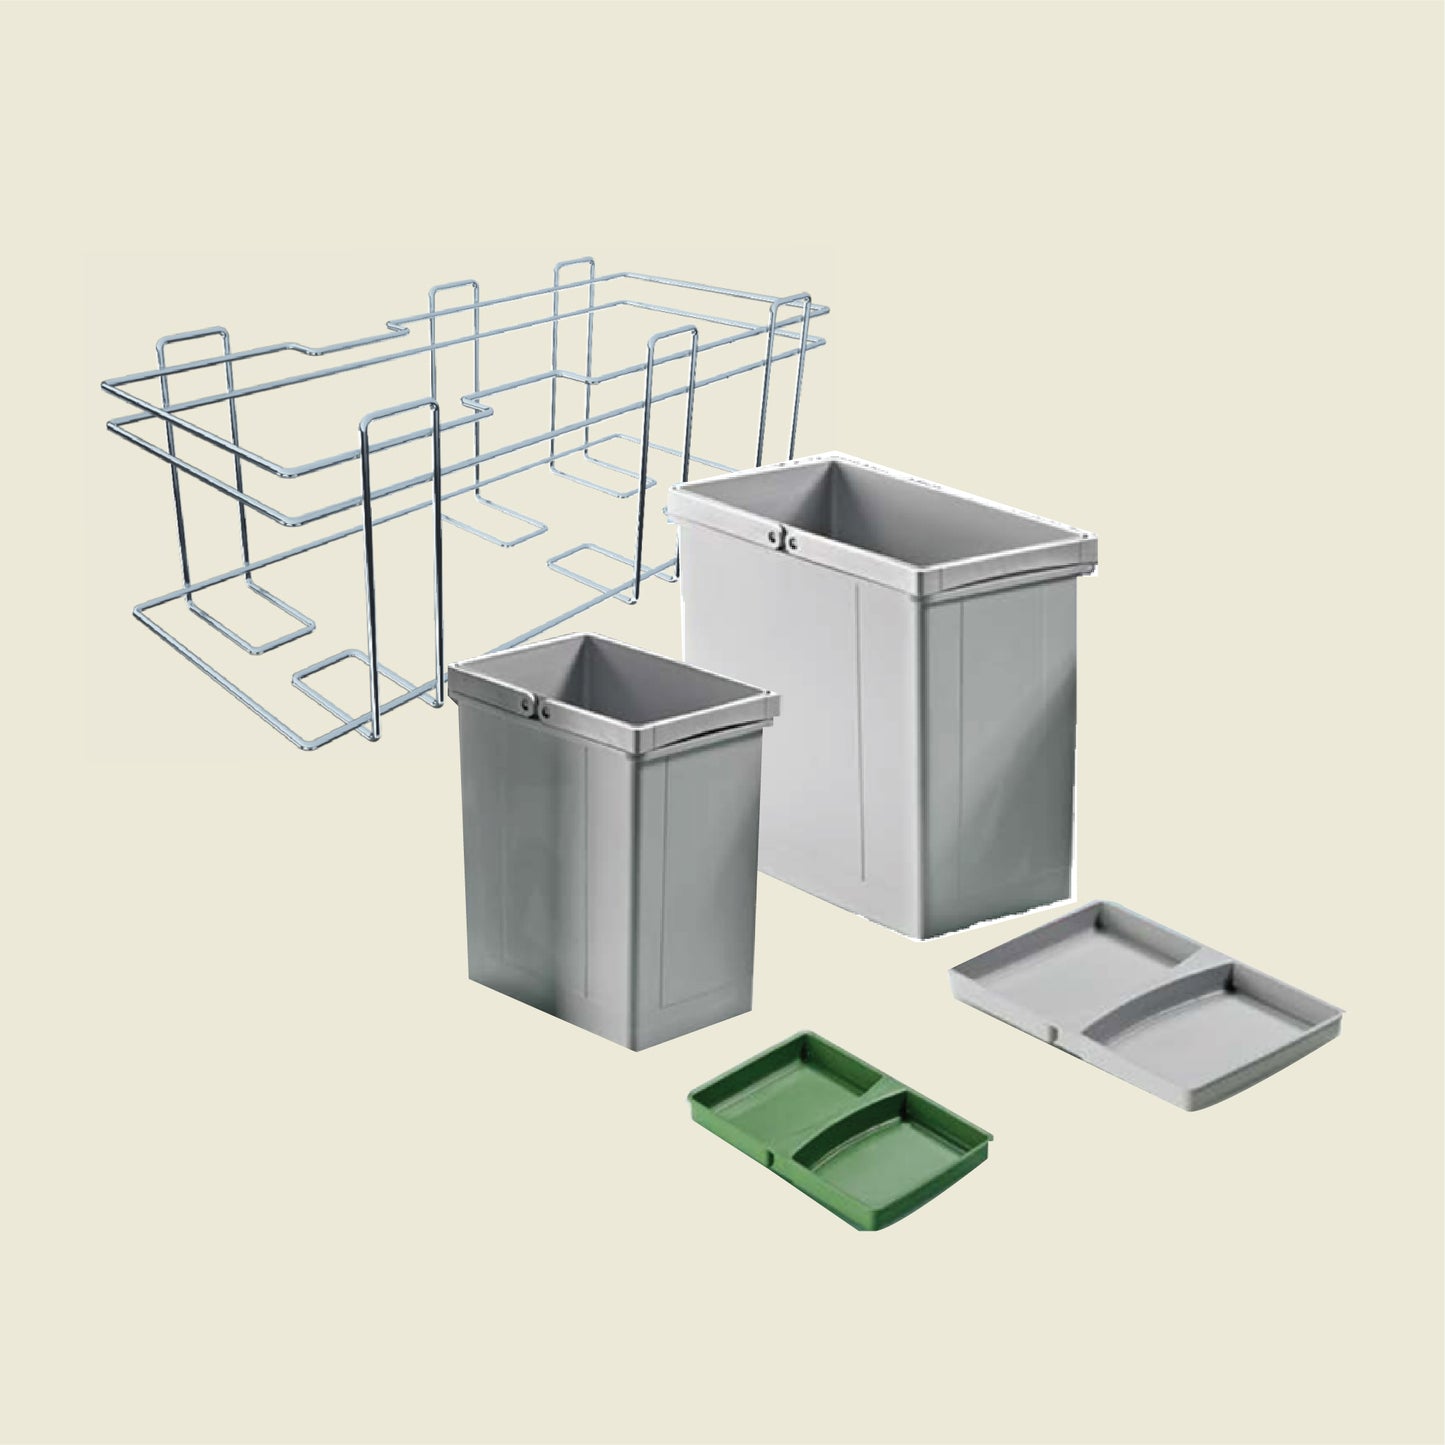 Hettich Cargo Pull- Out Waste Bin Holder With Bin & Lid, Size 536x225x205mm, Chrome Plated - HT926998500